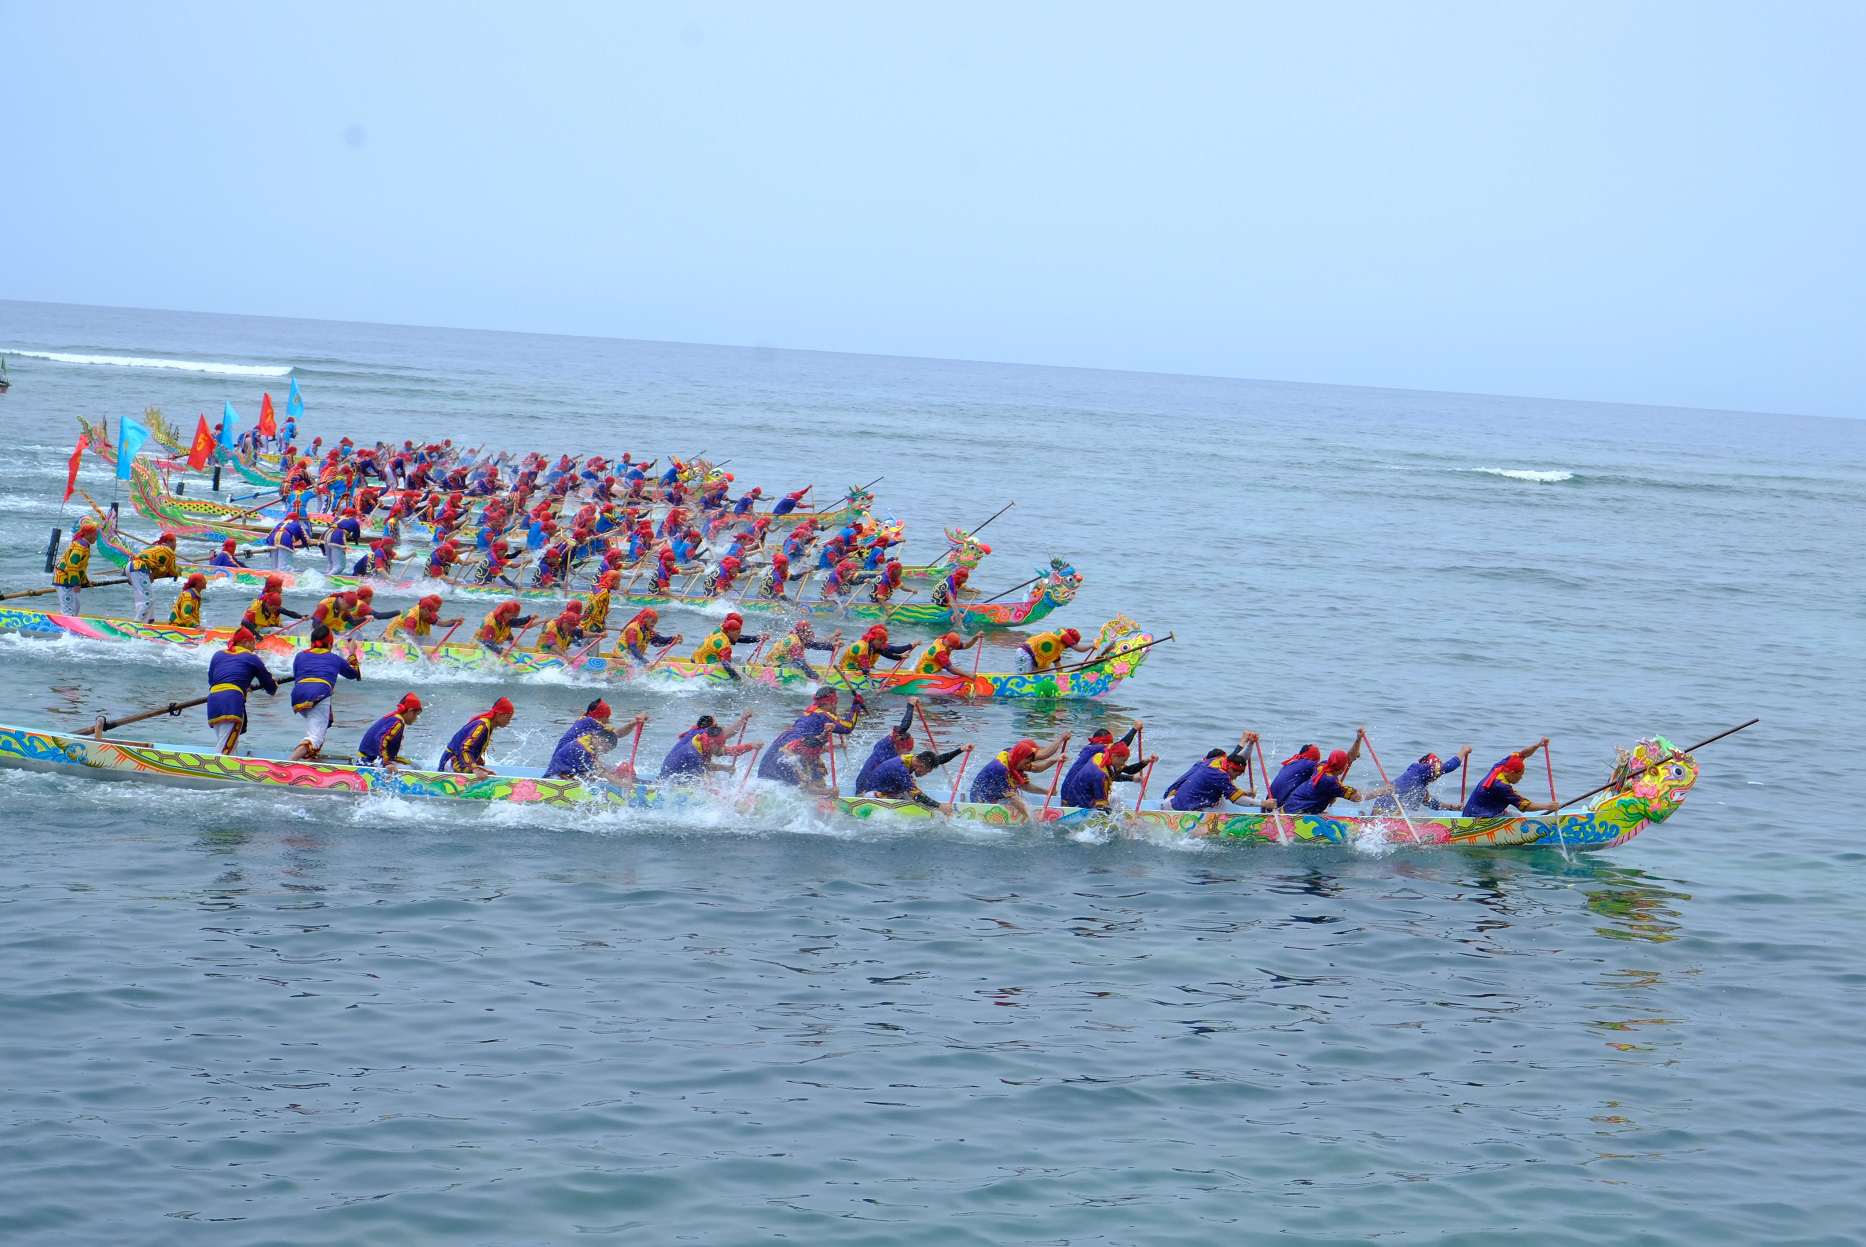 Teams compete at the Tu Linh boat racing festival in Ly Son District, Quang Ngai Province, Vietnam, April 27, 2021. Photo: Tran Mai / Tuoi Tre